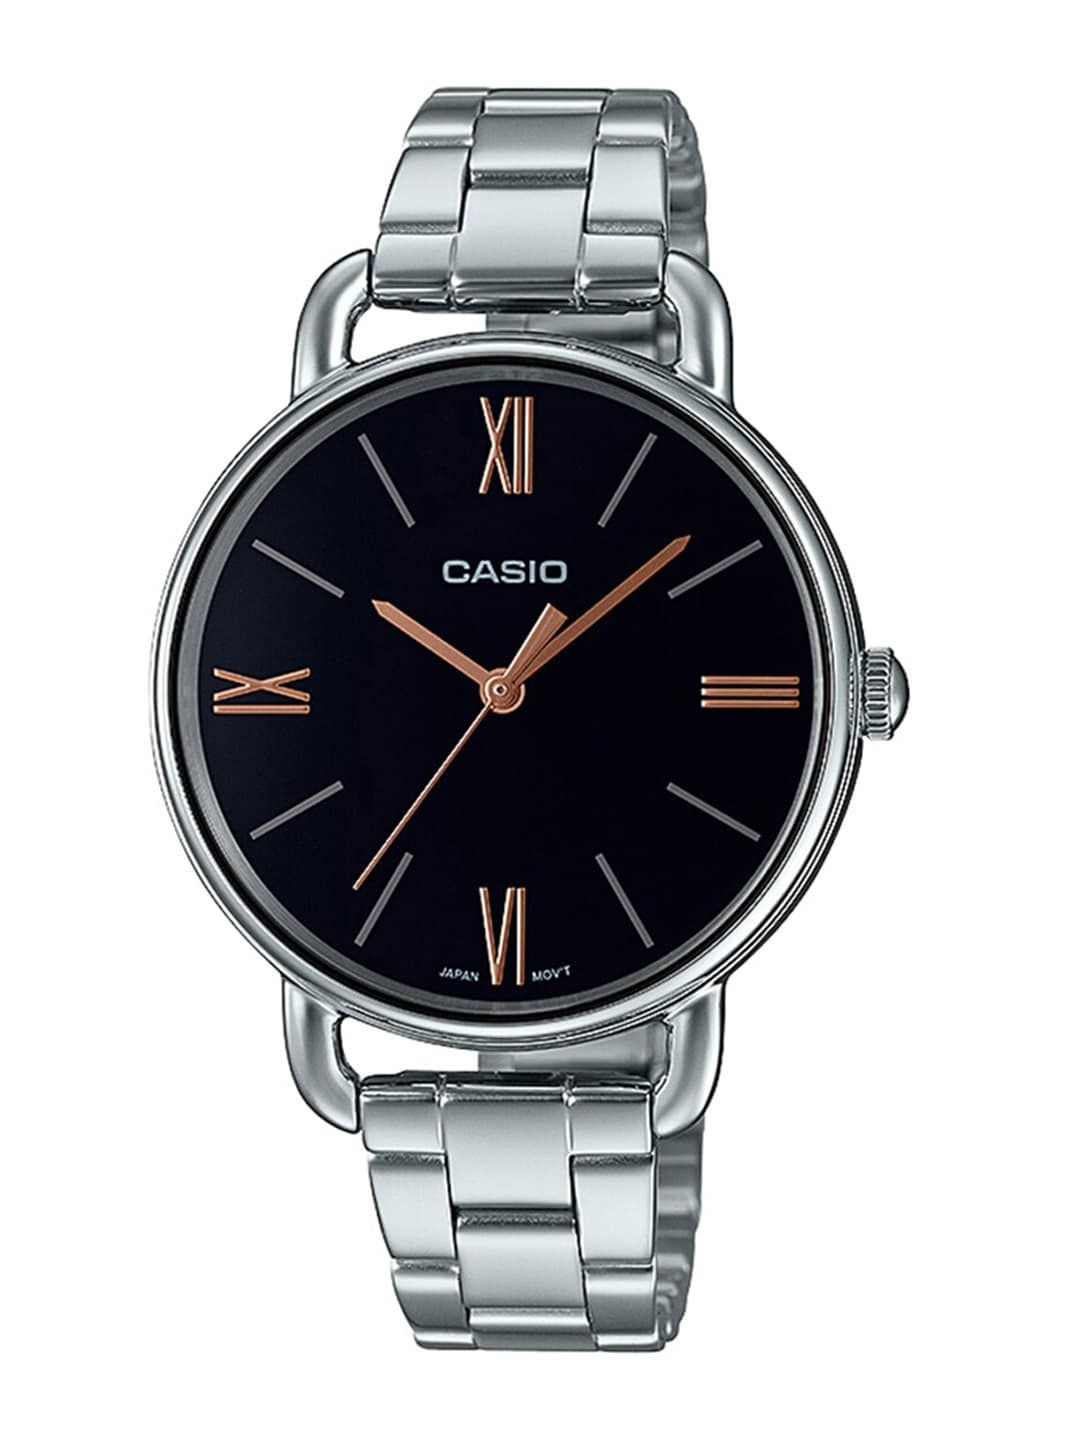 CASIO Enticer Ladies Black Analogue Watch A1803 Price in India